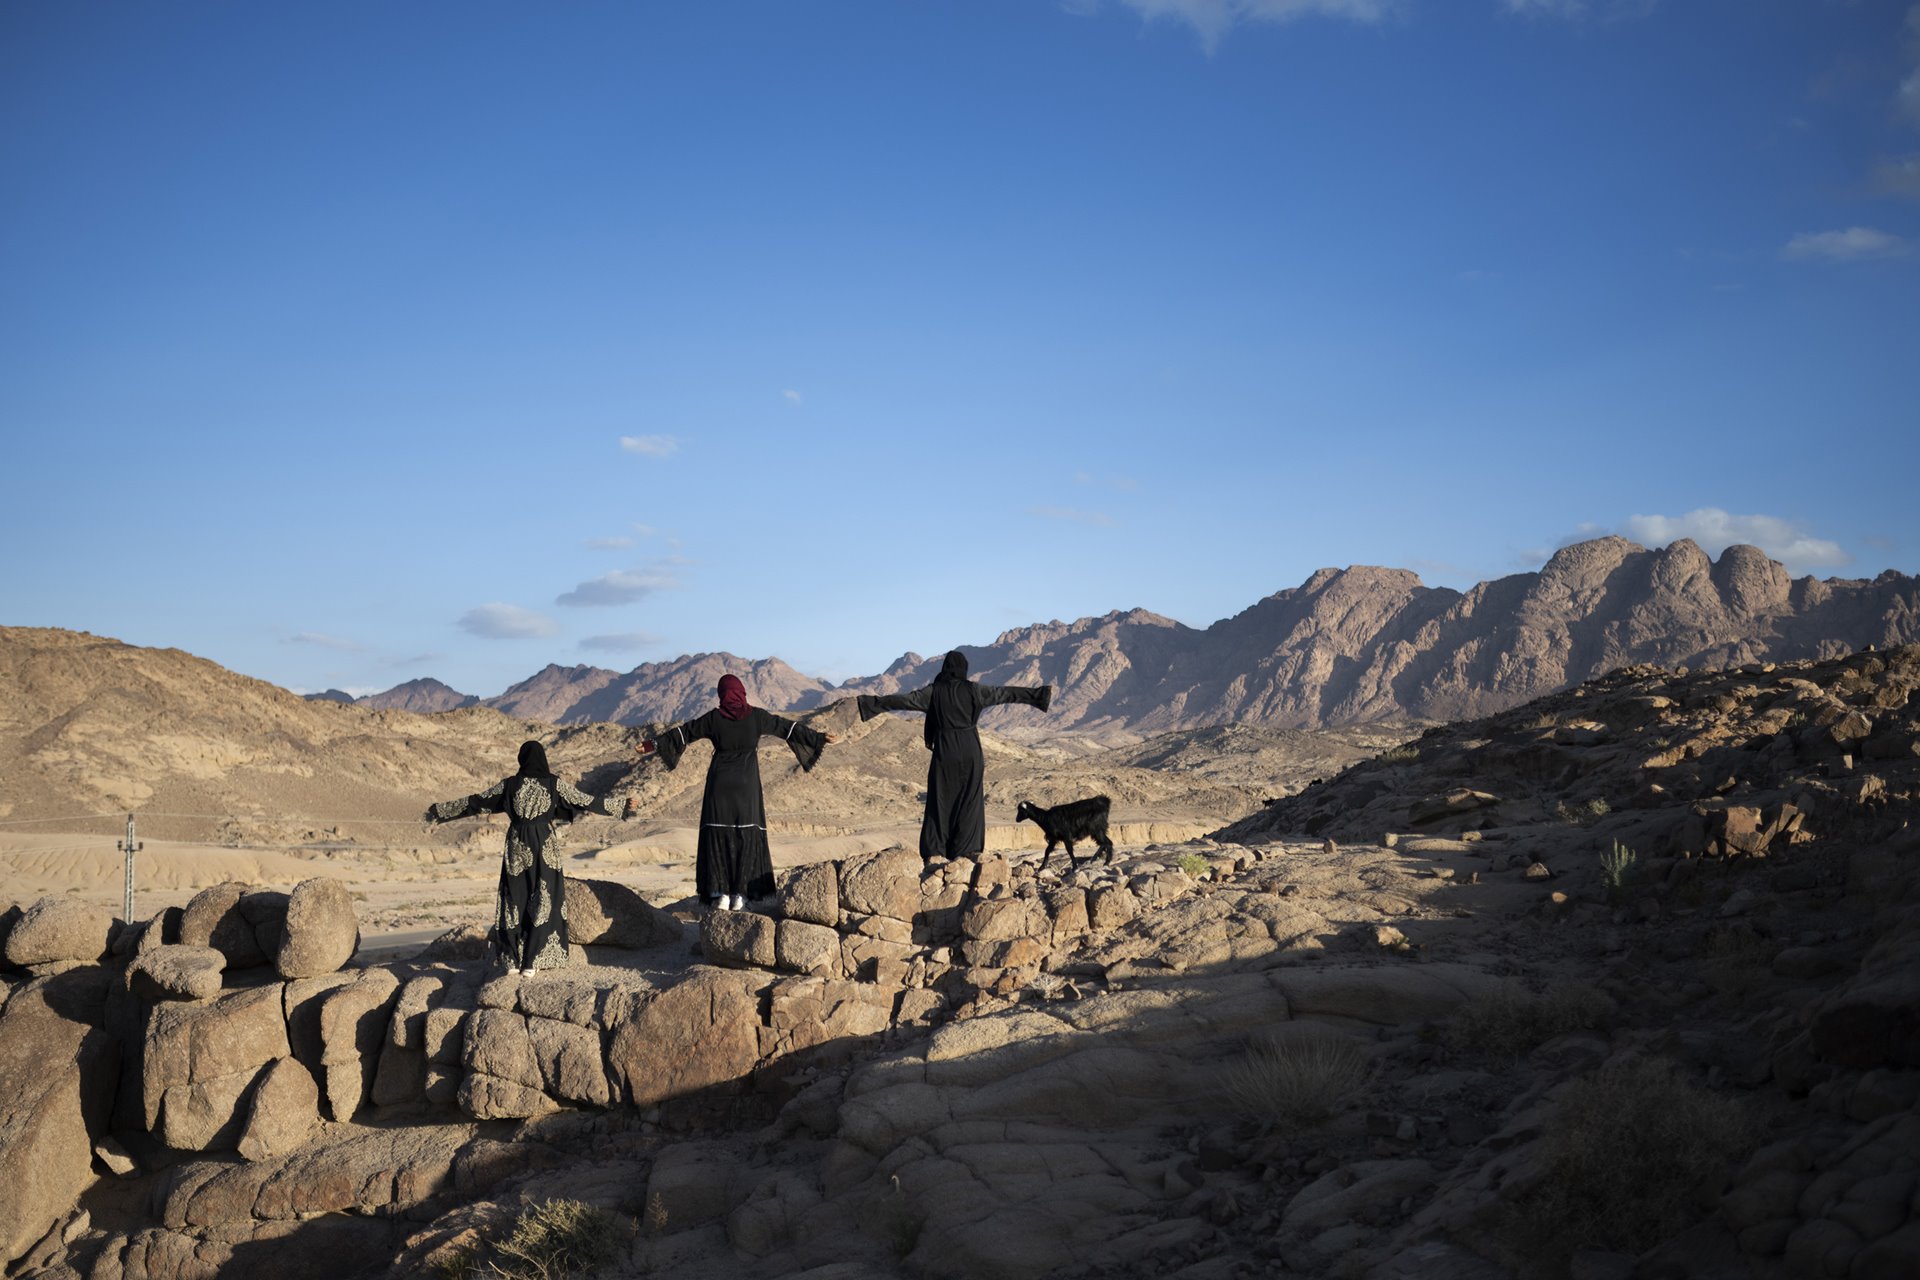 Nora, Nadia and Mariam stand on the edge of a mountain overlooking Al-Tarfa village, St. Catherine, South Sinai, Egypt. The women of Al-Tarfa village walk in a group of four from sunrise to sunset every day, herding sheep and goats as they graze on the wild plants of the surrounding mountains. As the herd feeds, the women talk, share concerns, ask for advice and learn from one another. A sisterhood is formed through mutual support and unity.